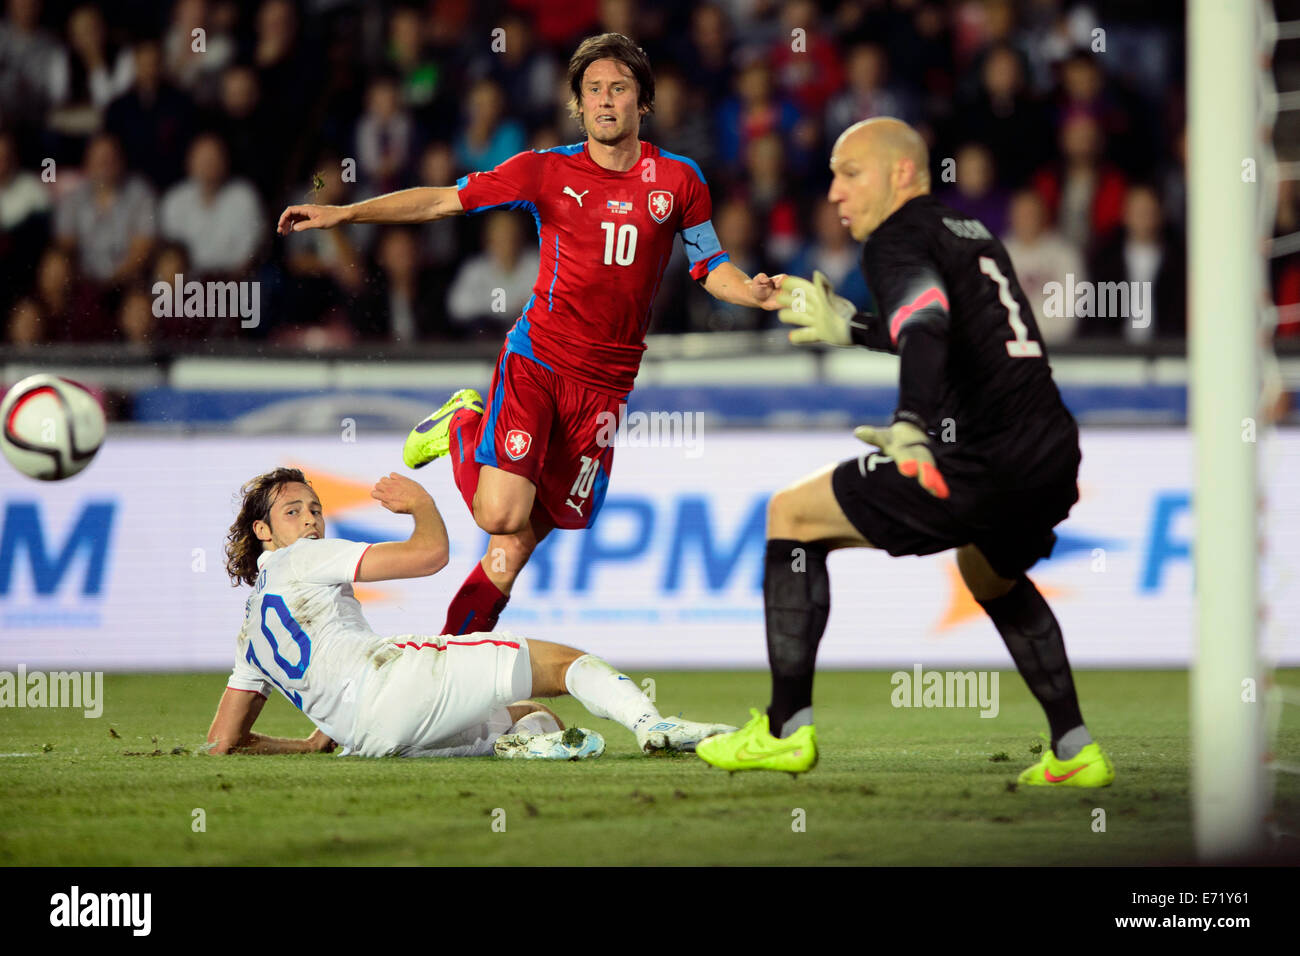 Left to right: Mix Diskerud of USA, Czech Republic's Tomas Rosicky and goalkeeper Brad Guzan of USA are seen during the soccer friendly match Czech Republic vs USA in Prague, Czech Republic, September 3, 2014. (CTK Photo/Michal Kamaryt) Stock Photo